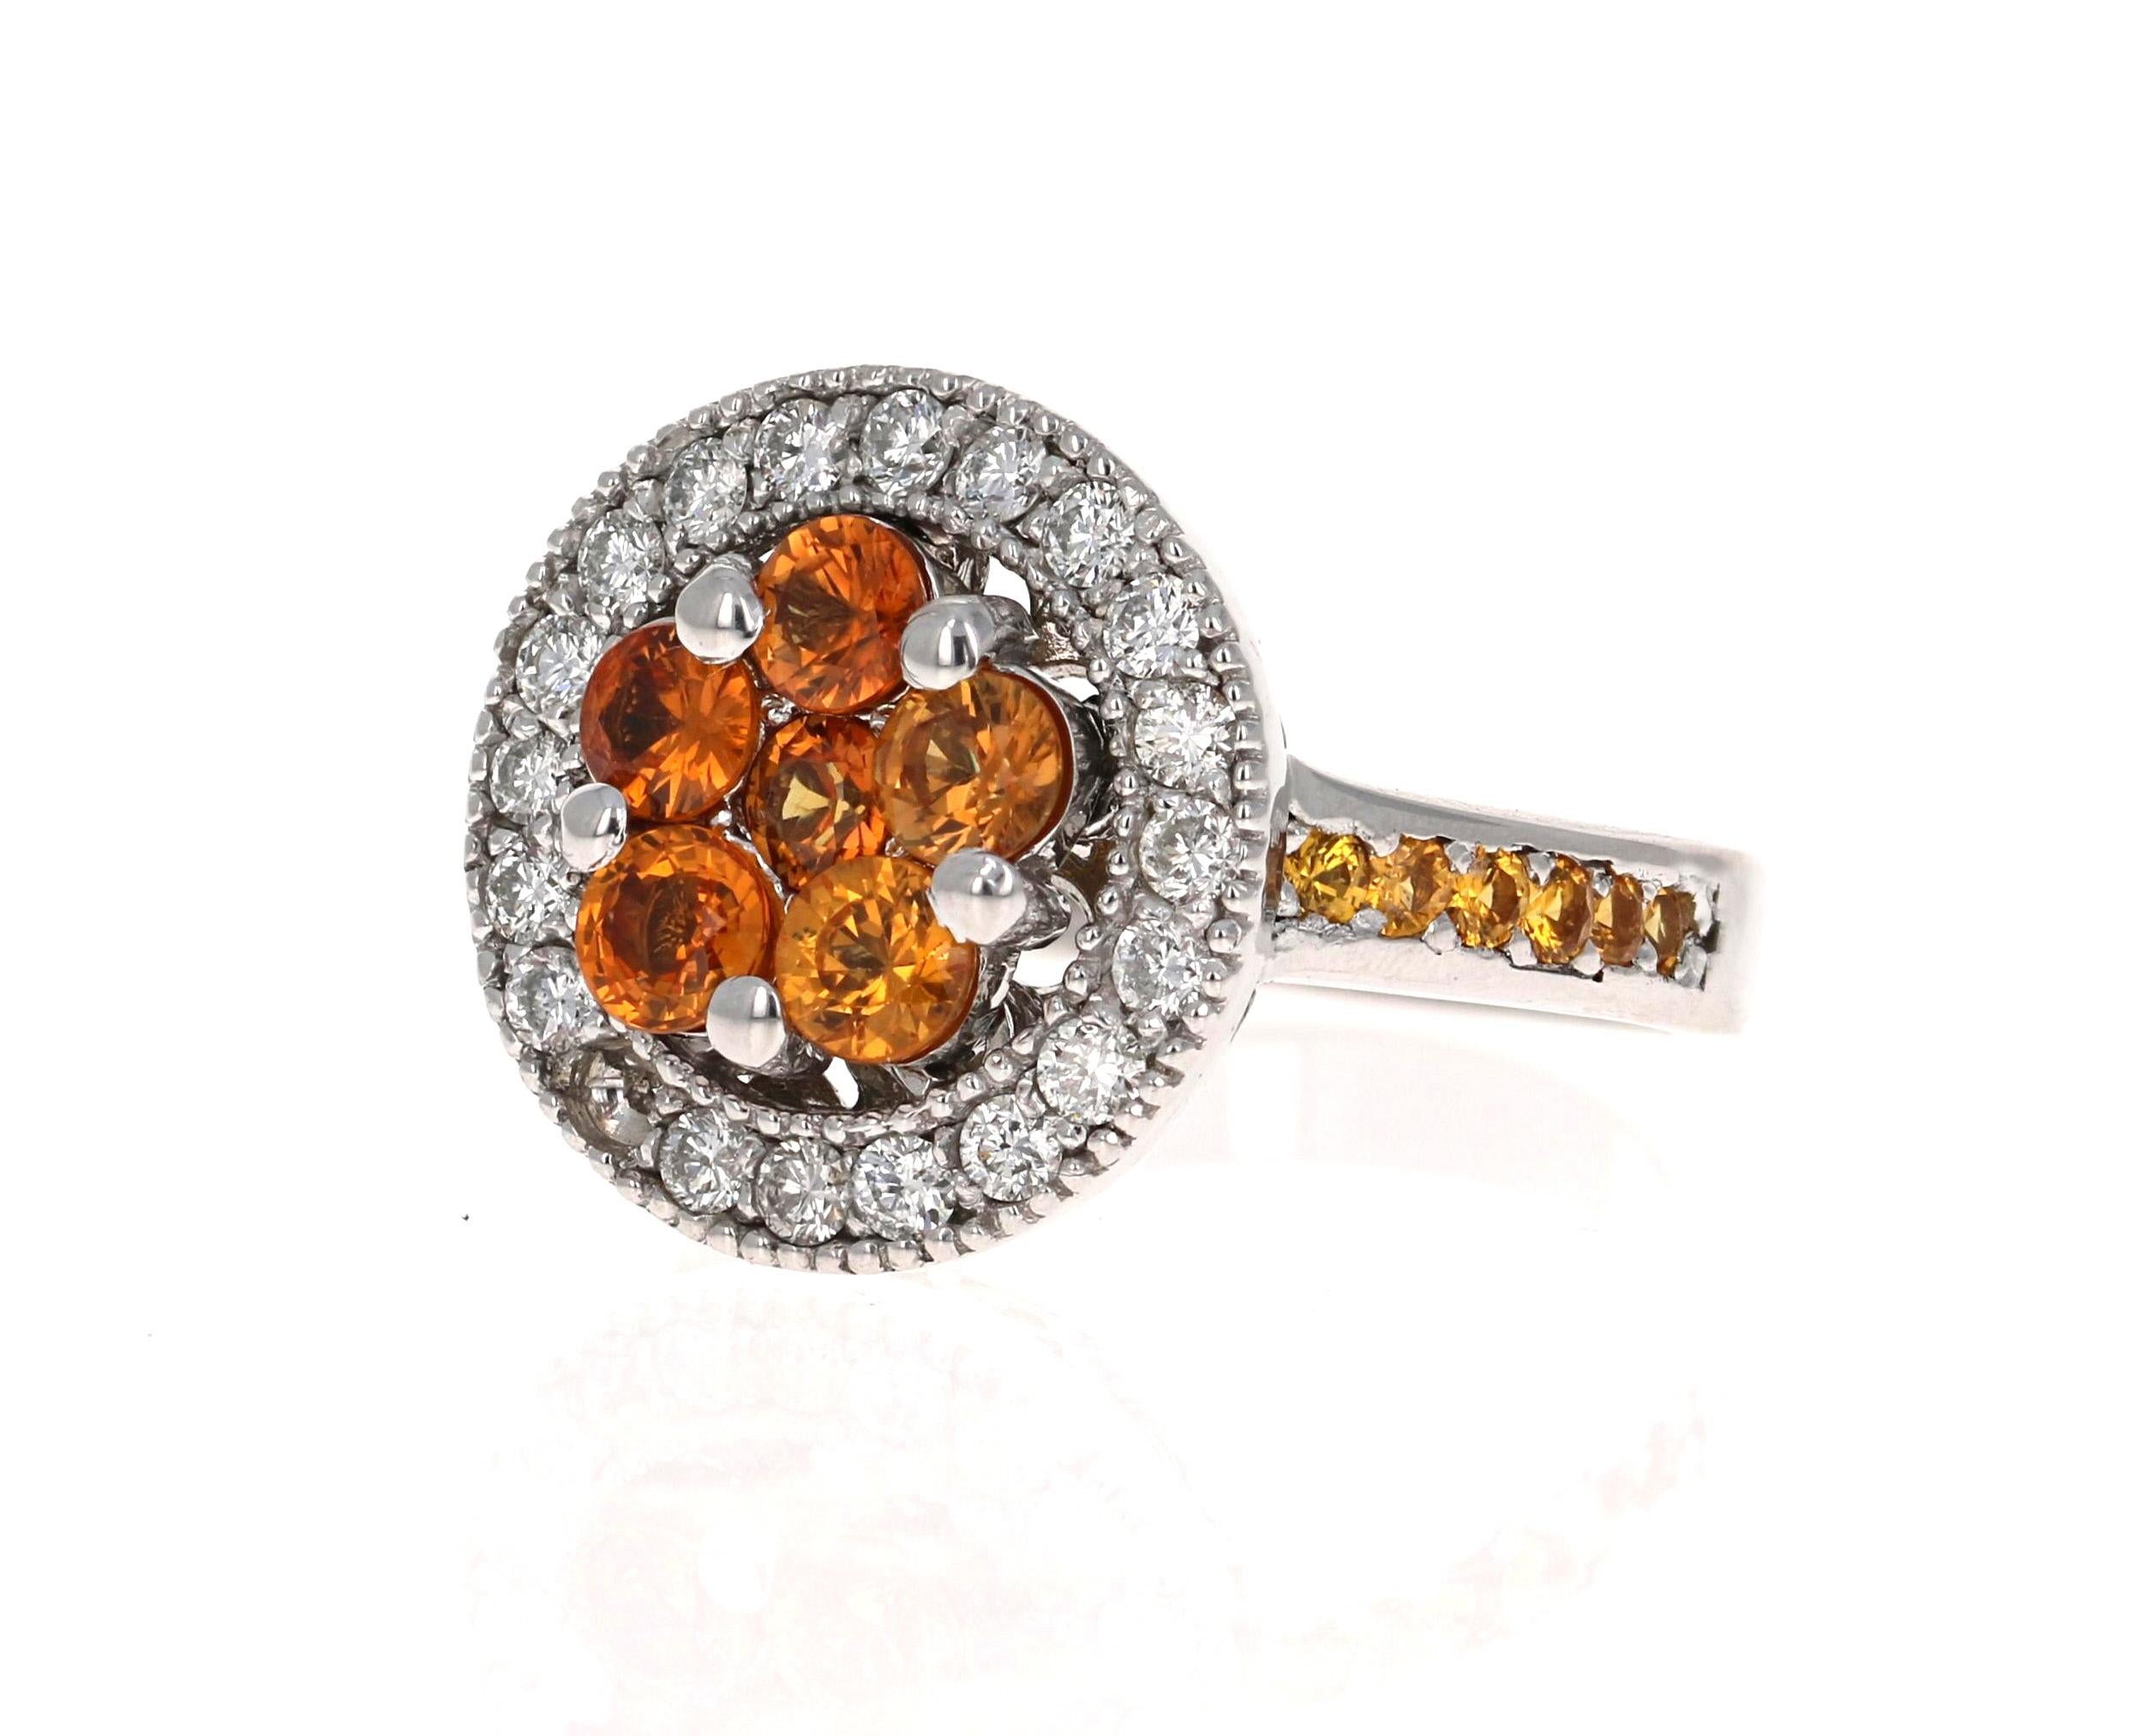 2.33 Carat Orange Sapphire Diamond White Gold Cocktail Ring

This ring has a cluster of 6 Orange Sapphires that weigh 1.45 Carats and 20 Round Cut Diamonds that weigh 0.51 carats Clarity: SI2, Color: F). Along the shank are 12 Yellow Sapphires that